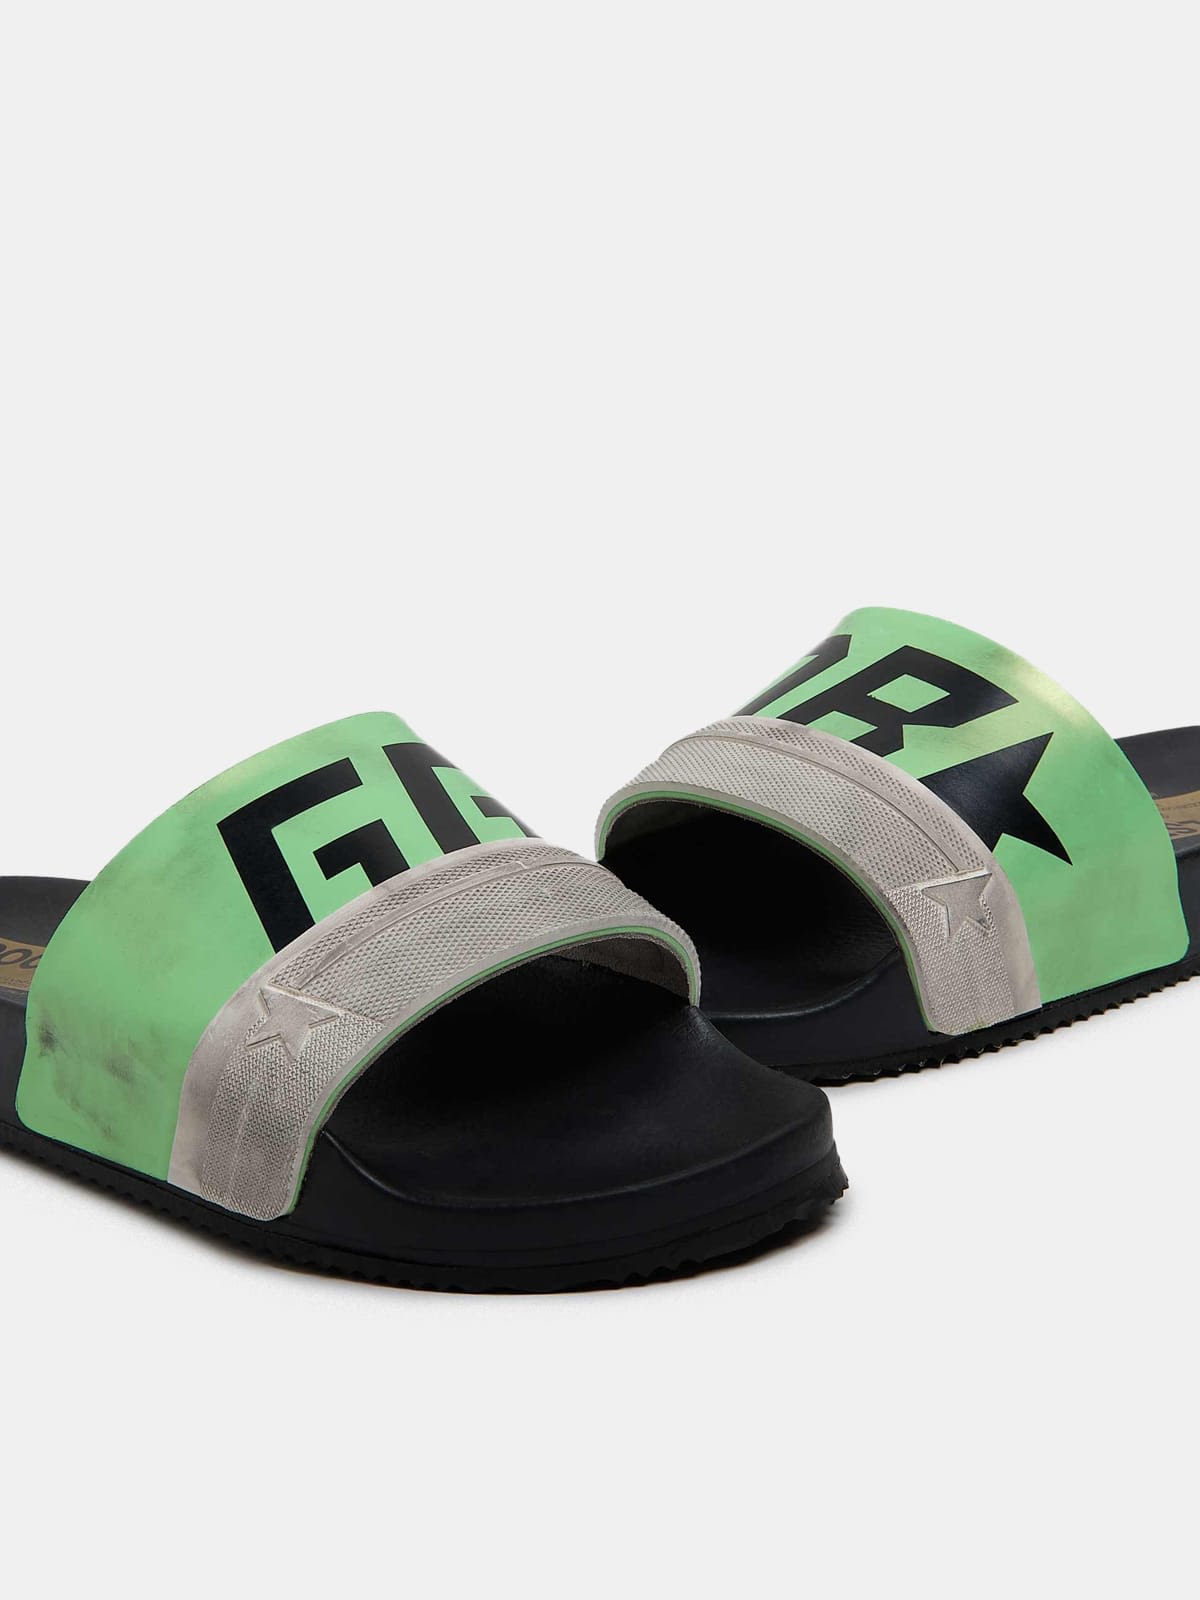 Black Poolstars for men with green strap and logo